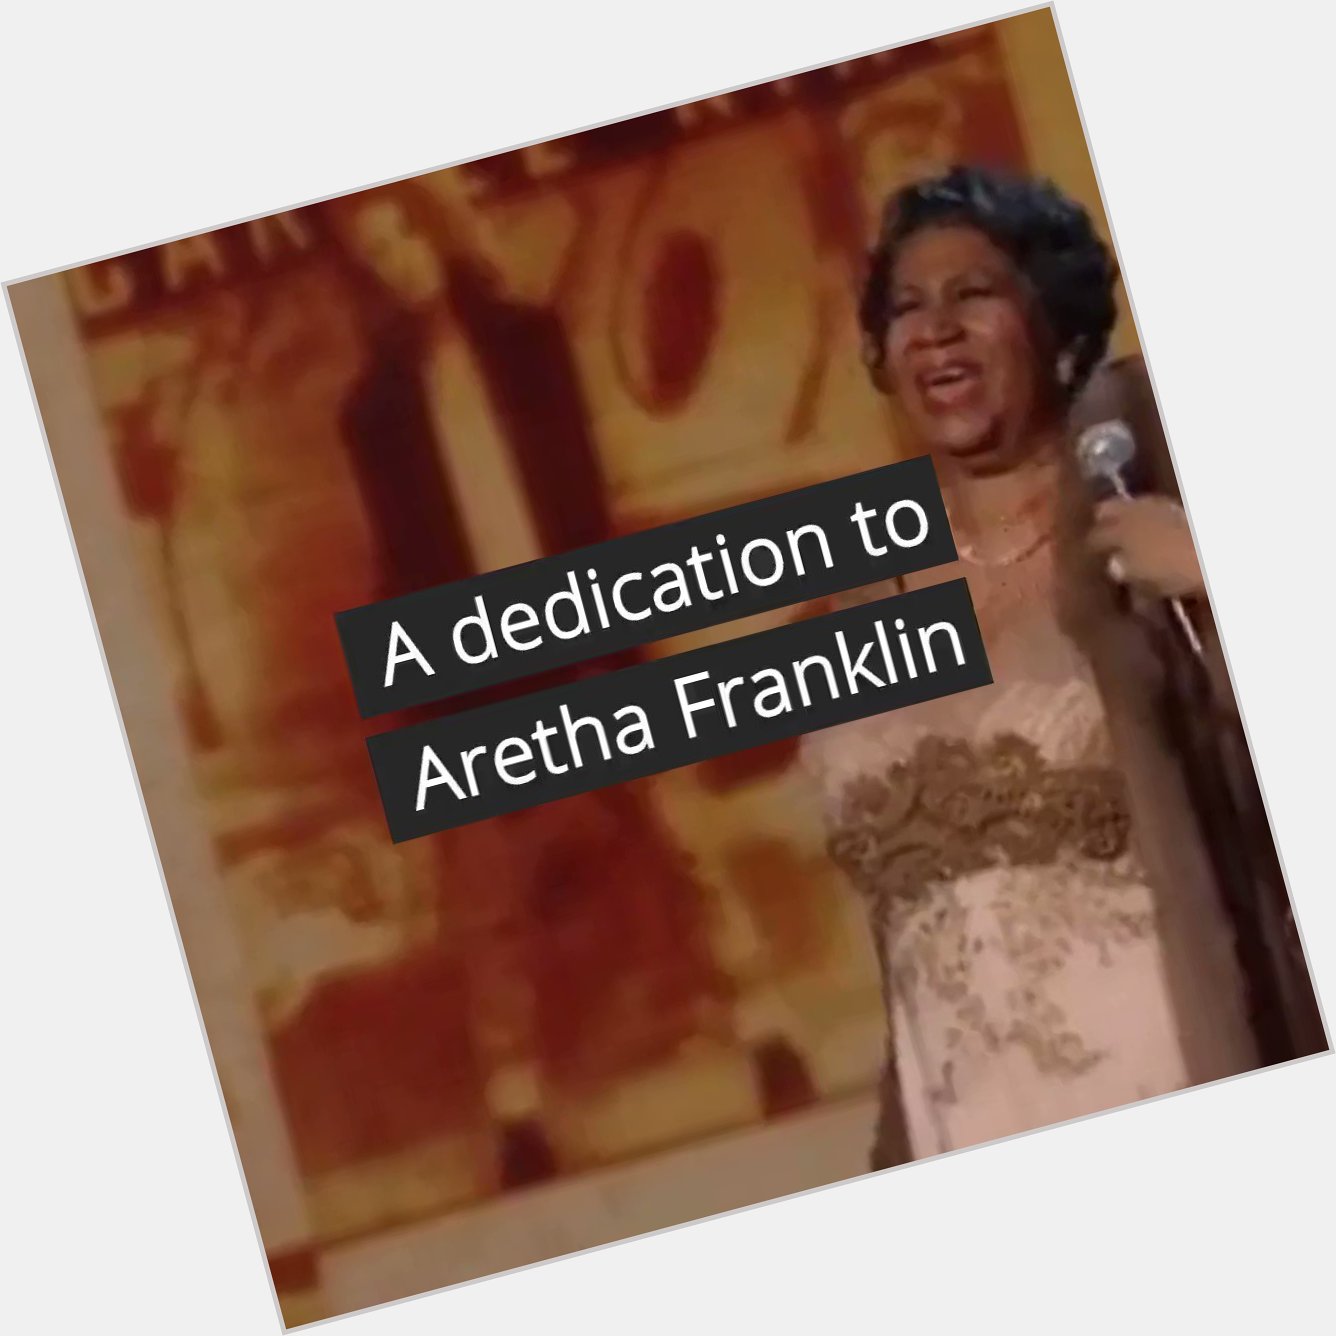 Aretha Franklin would have been 77 today! Happy Birthday to the Queen of Soul! What\s your favorite Aretha gif?! 